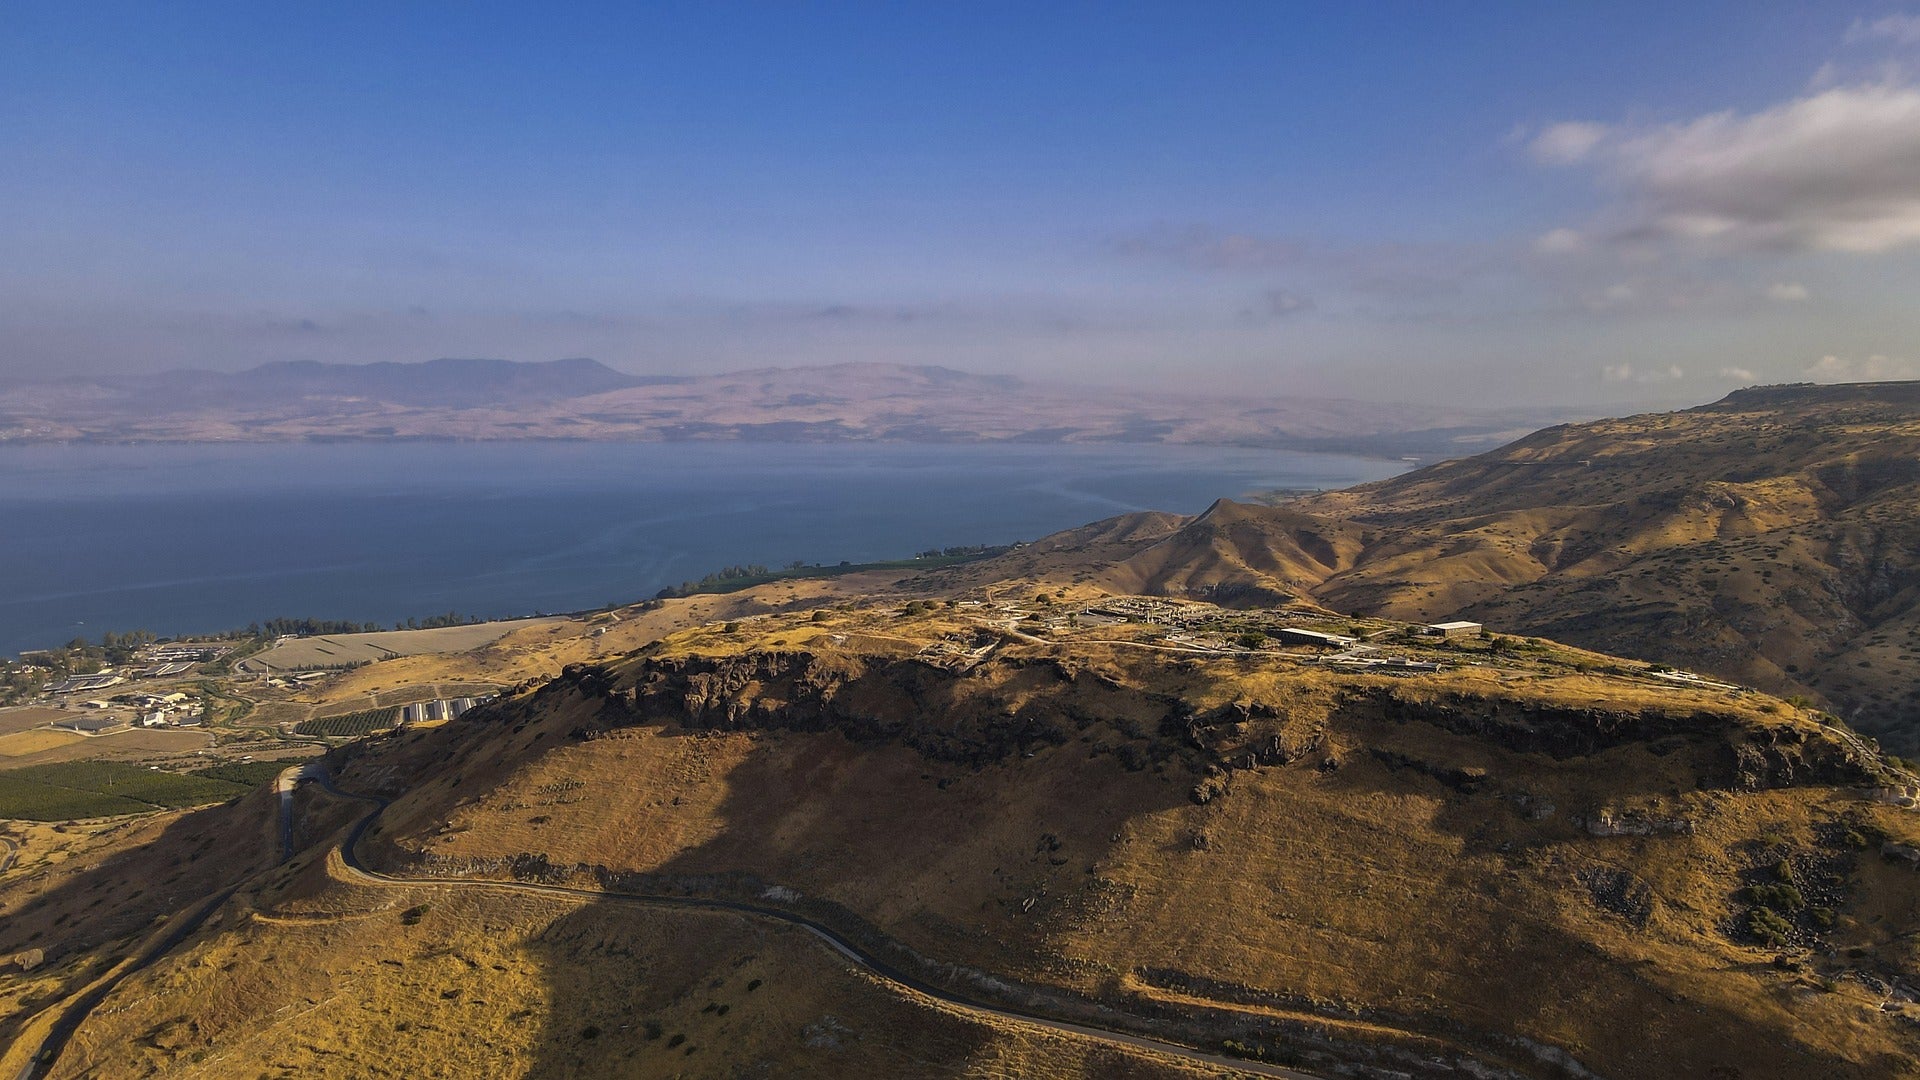 Golan heights sea of galilee view private trip